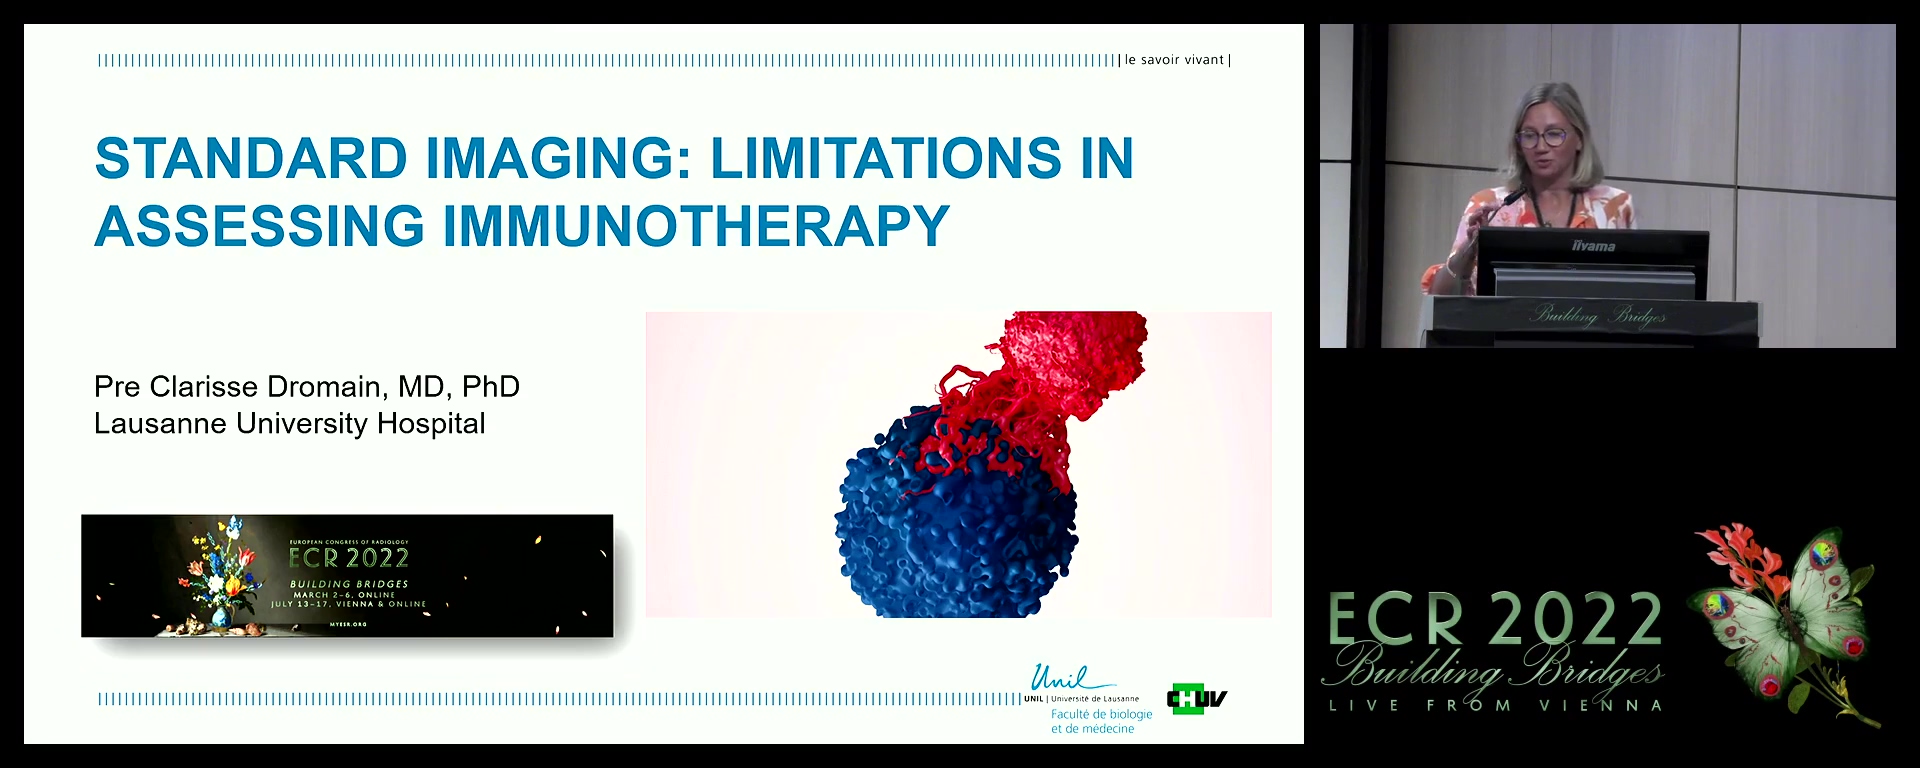 Standard imaging: limitations in assessing immunotherapy?